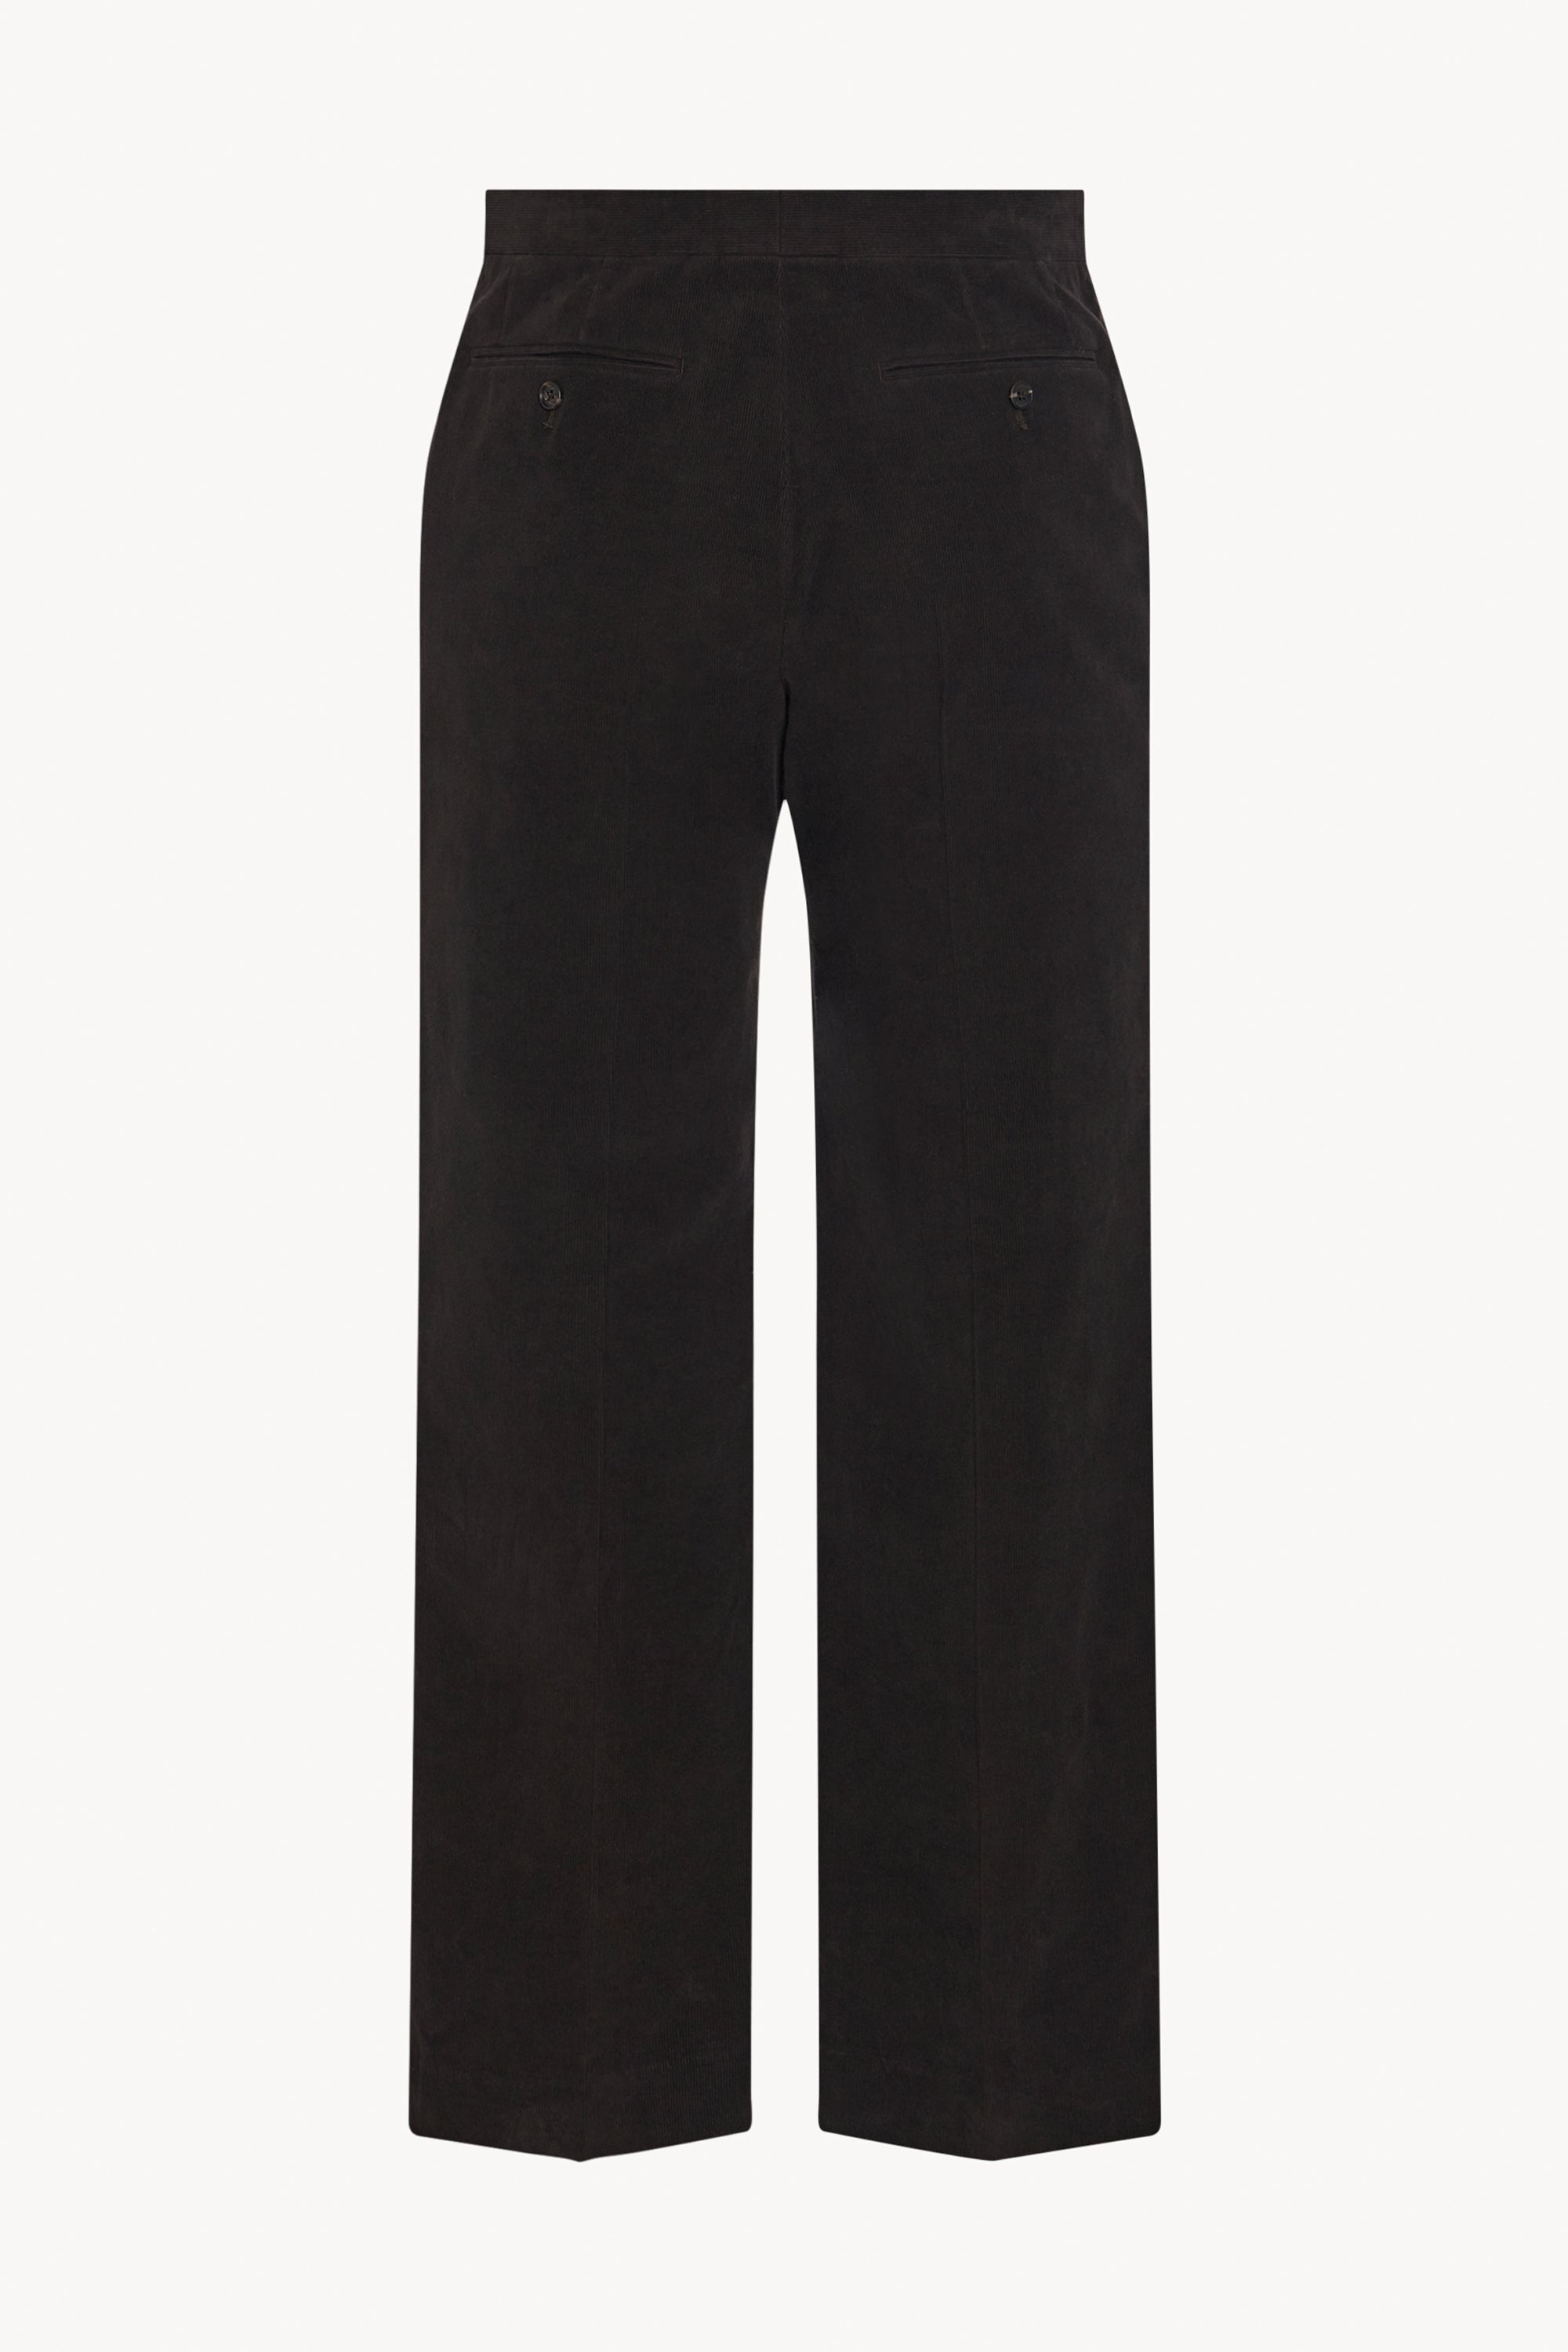 Baird Pant in Cotton - 2